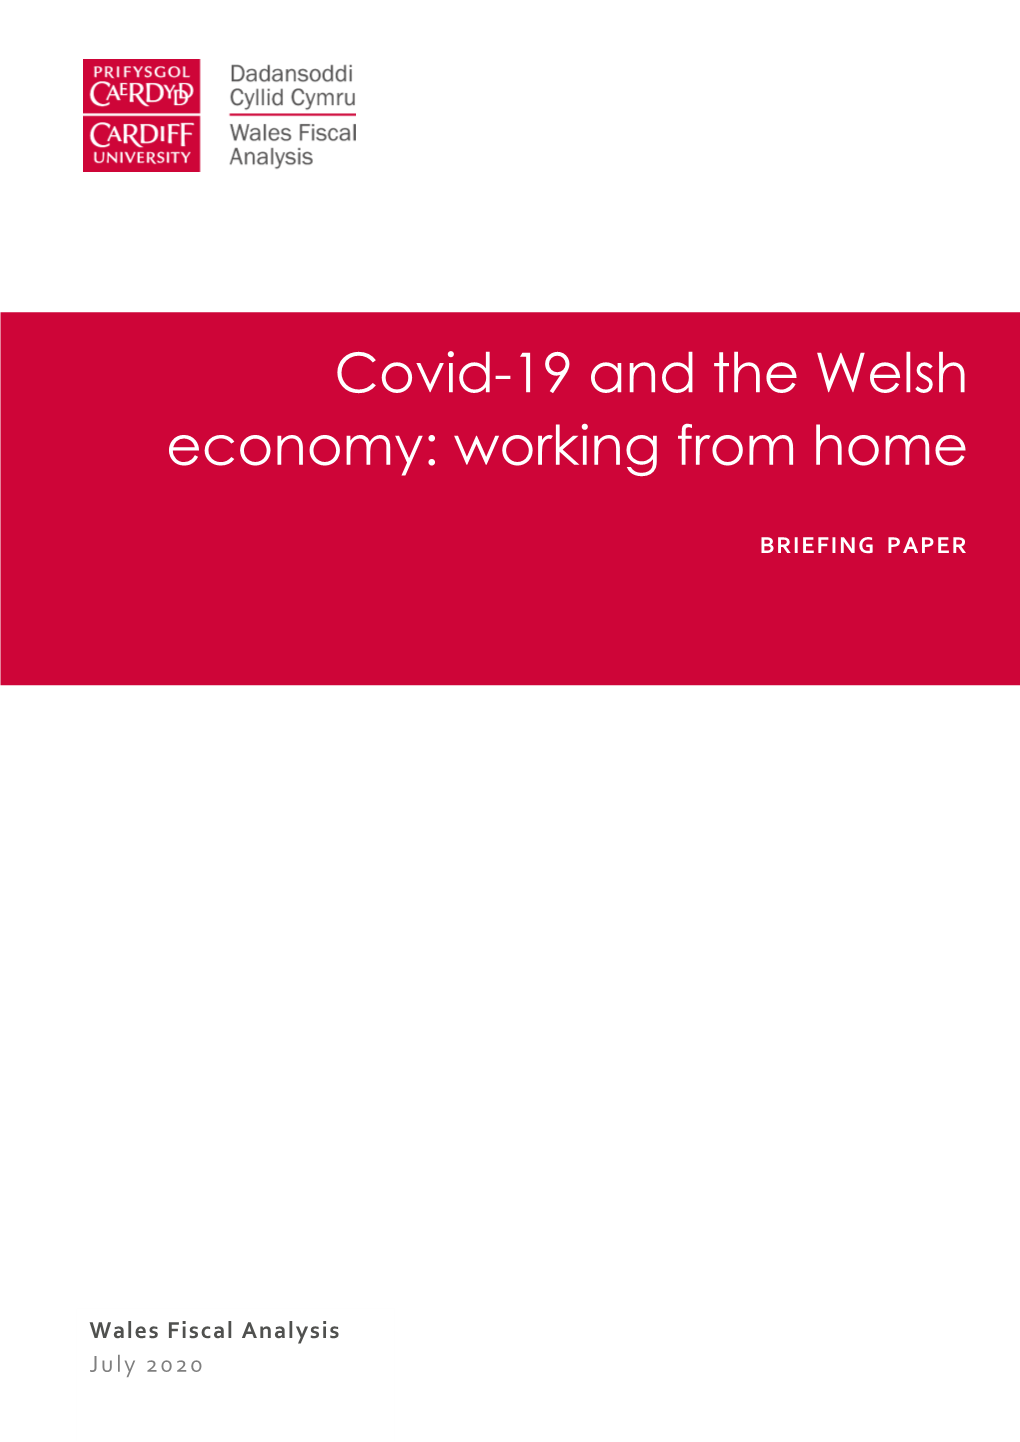 Covid-19 and the Welsh Economy: Working from Home